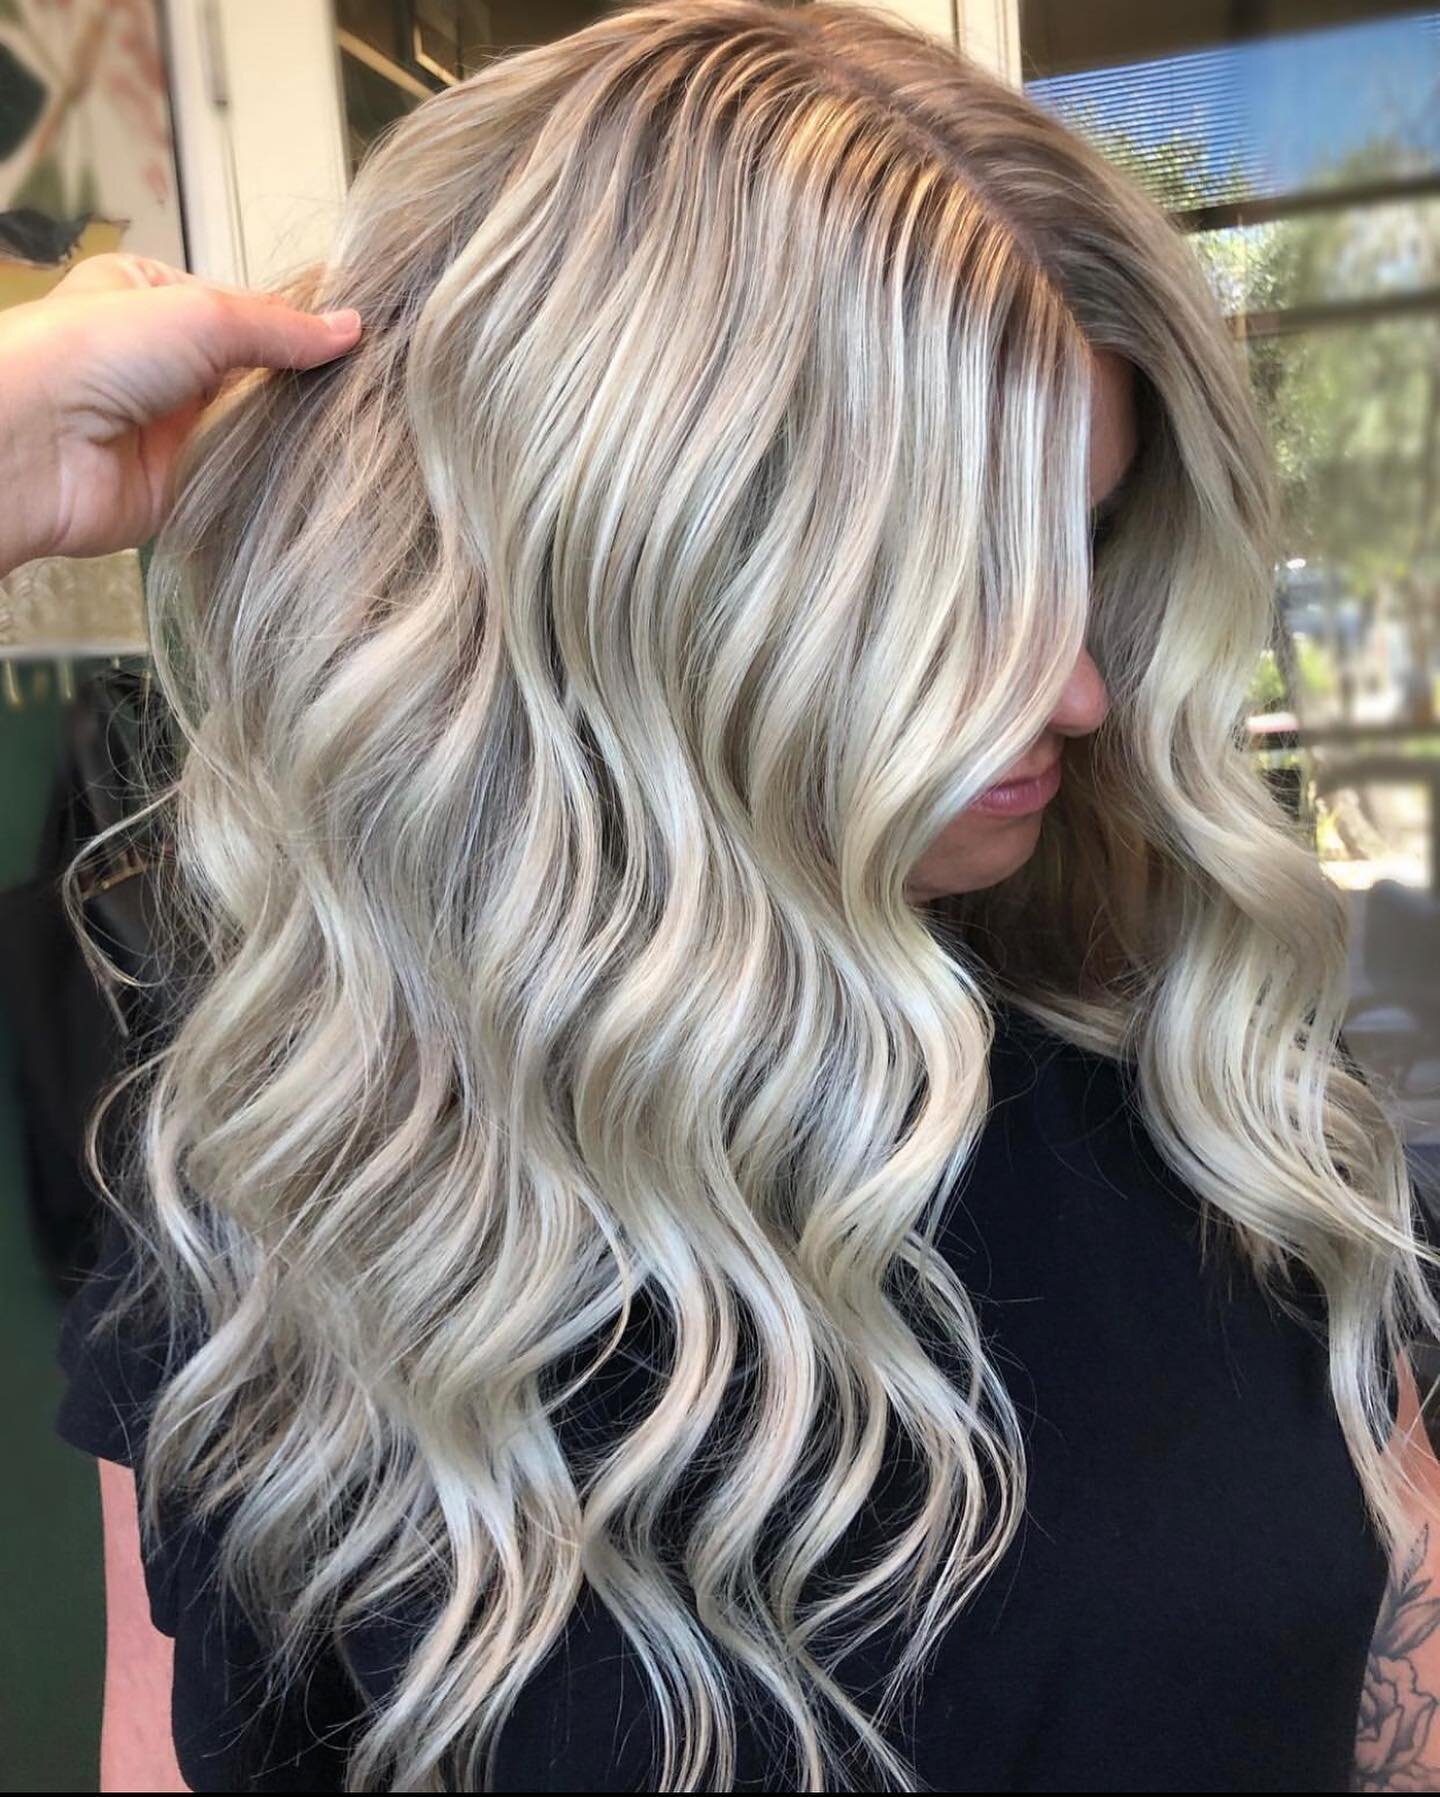 ✨platinum perfection✨
By @natalies_hair_design 

Studio 55 Salons is a premier provider of private salon suites in Sacramento, Roseville and Folsom. 

#studio55salons